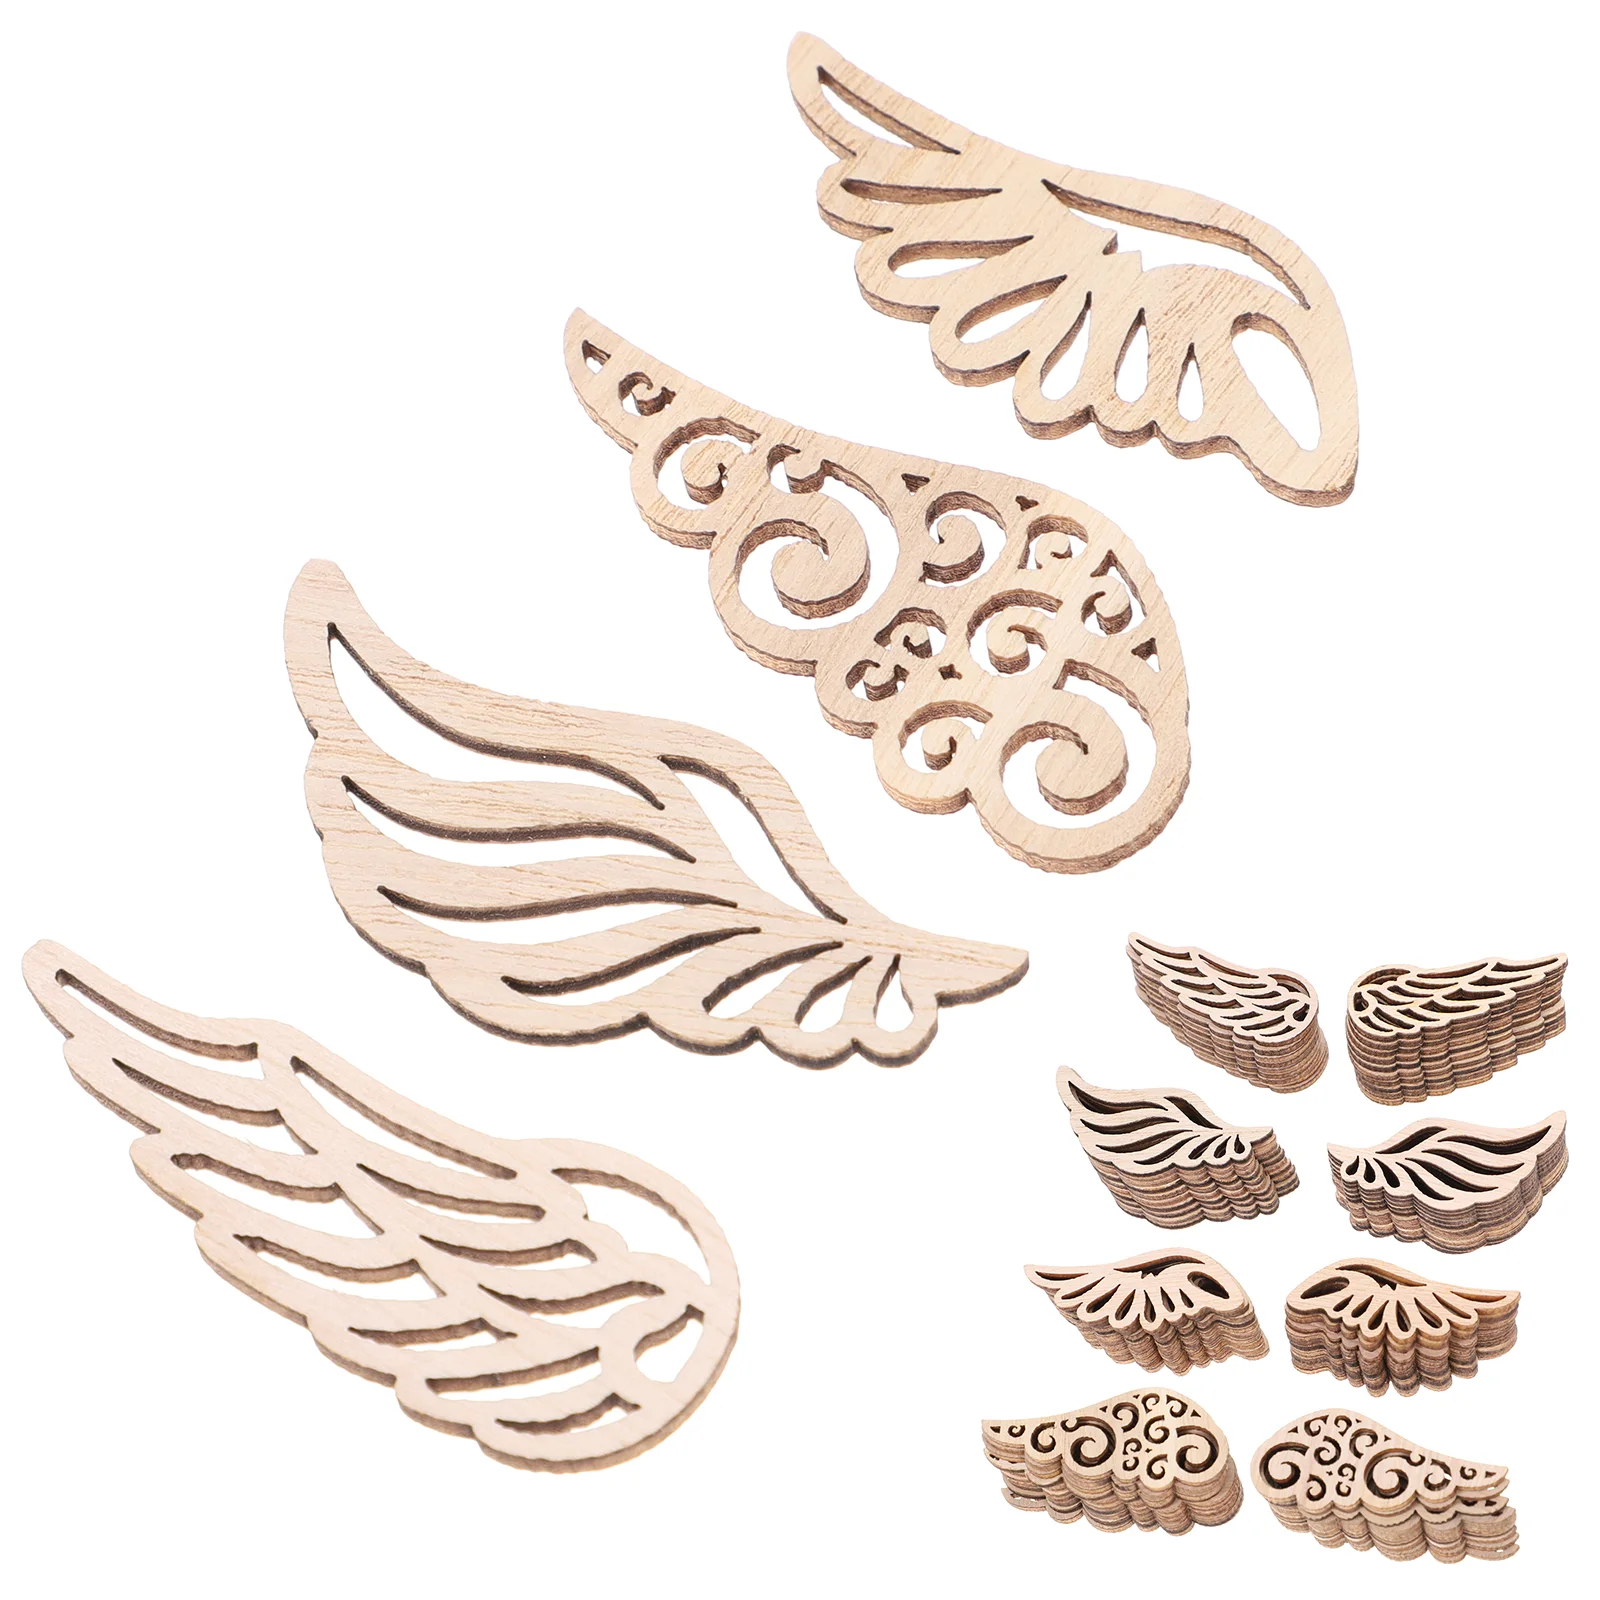 Wooden Angel Wings Shape For Crafts And Decoration - Laser Cut - Angel Wing  - Angel - Angel Wing Necklace - Wings Silhouette - Wood Diy Crafts -  AliExpress